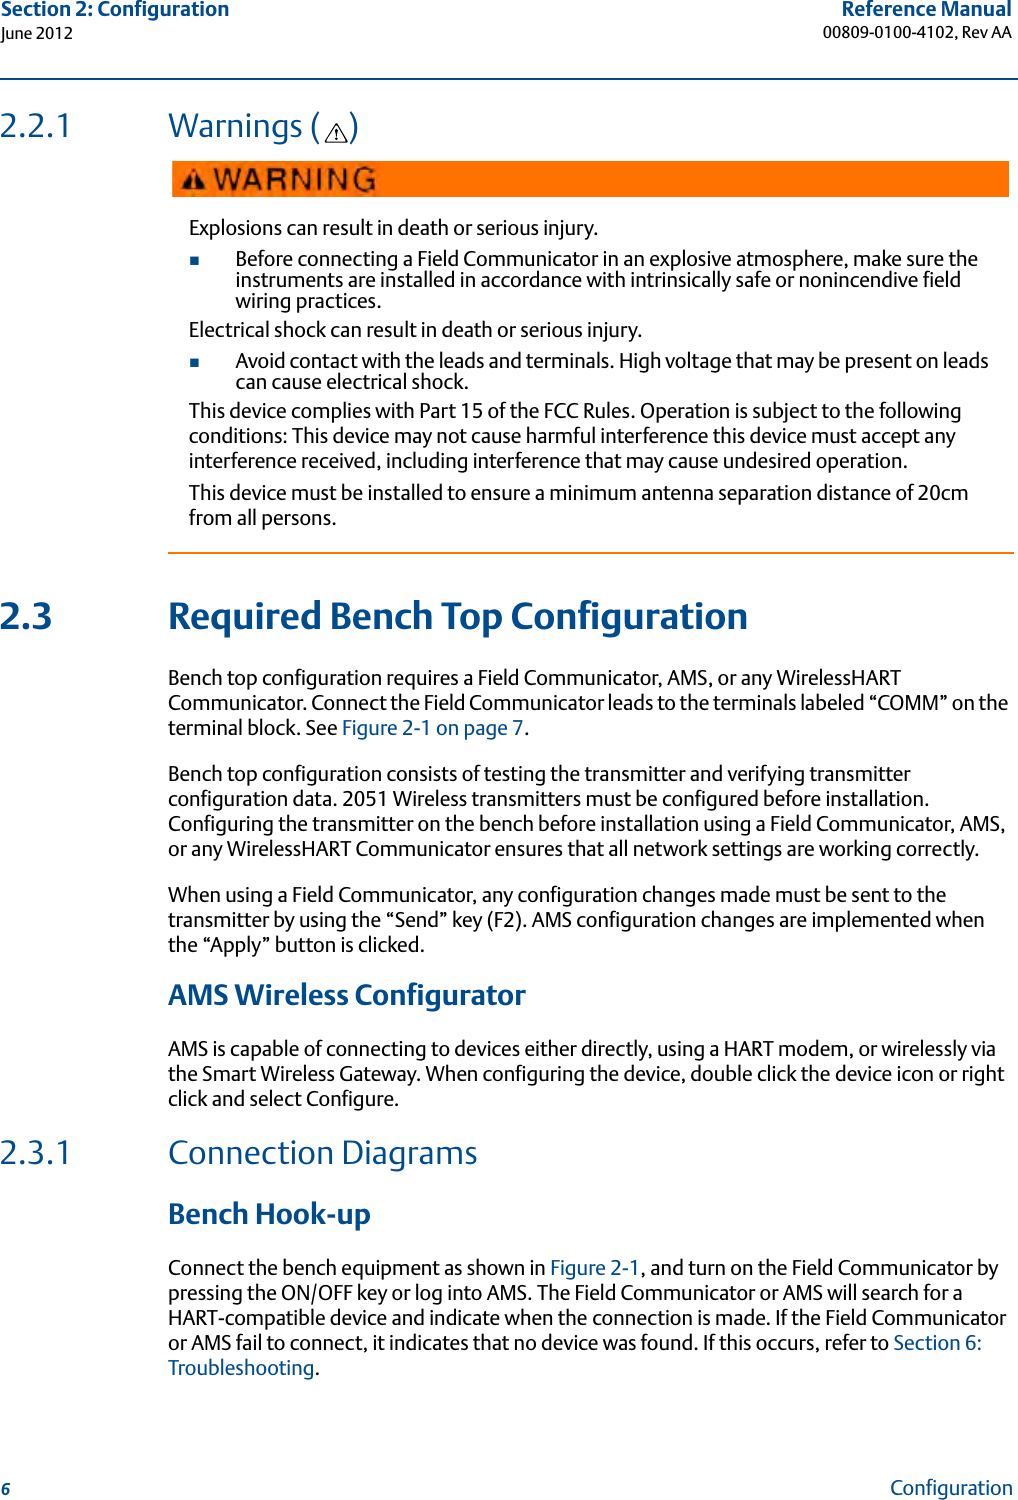 6Reference Manual00809-0100-4102, Rev AASection 2: ConfigurationJune 2012Configuration2.2.1 Warnings ( )2.3 Required Bench Top ConfigurationBench top configuration requires a Field Communicator, AMS, or any WirelessHART Communicator. Connect the Field Communicator leads to the terminals labeled “COMM” on the terminal block. See Figure 2-1 on page 7.Bench top configuration consists of testing the transmitter and verifying transmitter configuration data. 2051 Wireless transmitters must be configured before installation. Configuring the transmitter on the bench before installation using a Field Communicator, AMS, or any WirelessHART Communicator ensures that all network settings are working correctly.When using a Field Communicator, any configuration changes made must be sent to the transmitter by using the “Send” key (F2). AMS configuration changes are implemented when the “Apply” button is clicked.AMS Wireless ConfiguratorAMS is capable of connecting to devices either directly, using a HART modem, or wirelessly via the Smart Wireless Gateway. When configuring the device, double click the device icon or right click and select Configure.2.3.1 Connection Diagrams Bench Hook-upConnect the bench equipment as shown in Figure 2-1, and turn on the Field Communicator by pressing the ON/OFF key or log into AMS. The Field Communicator or AMS will search for a HART-compatible device and indicate when the connection is made. If the Field Communicator or AMS fail to connect, it indicates that no device was found. If this occurs, refer to Section 6: Troubleshooting.Explosions can result in death or serious injury.Before connecting a Field Communicator in an explosive atmosphere, make sure the instruments are installed in accordance with intrinsically safe or nonincendive field wiring practices.Electrical shock can result in death or serious injury.Avoid contact with the leads and terminals. High voltage that may be present on leads can cause electrical shock.This device complies with Part 15 of the FCC Rules. Operation is subject to the following conditions: This device may not cause harmful interference this device must accept any interference received, including interference that may cause undesired operation.This device must be installed to ensure a minimum antenna separation distance of 20cm from all persons.